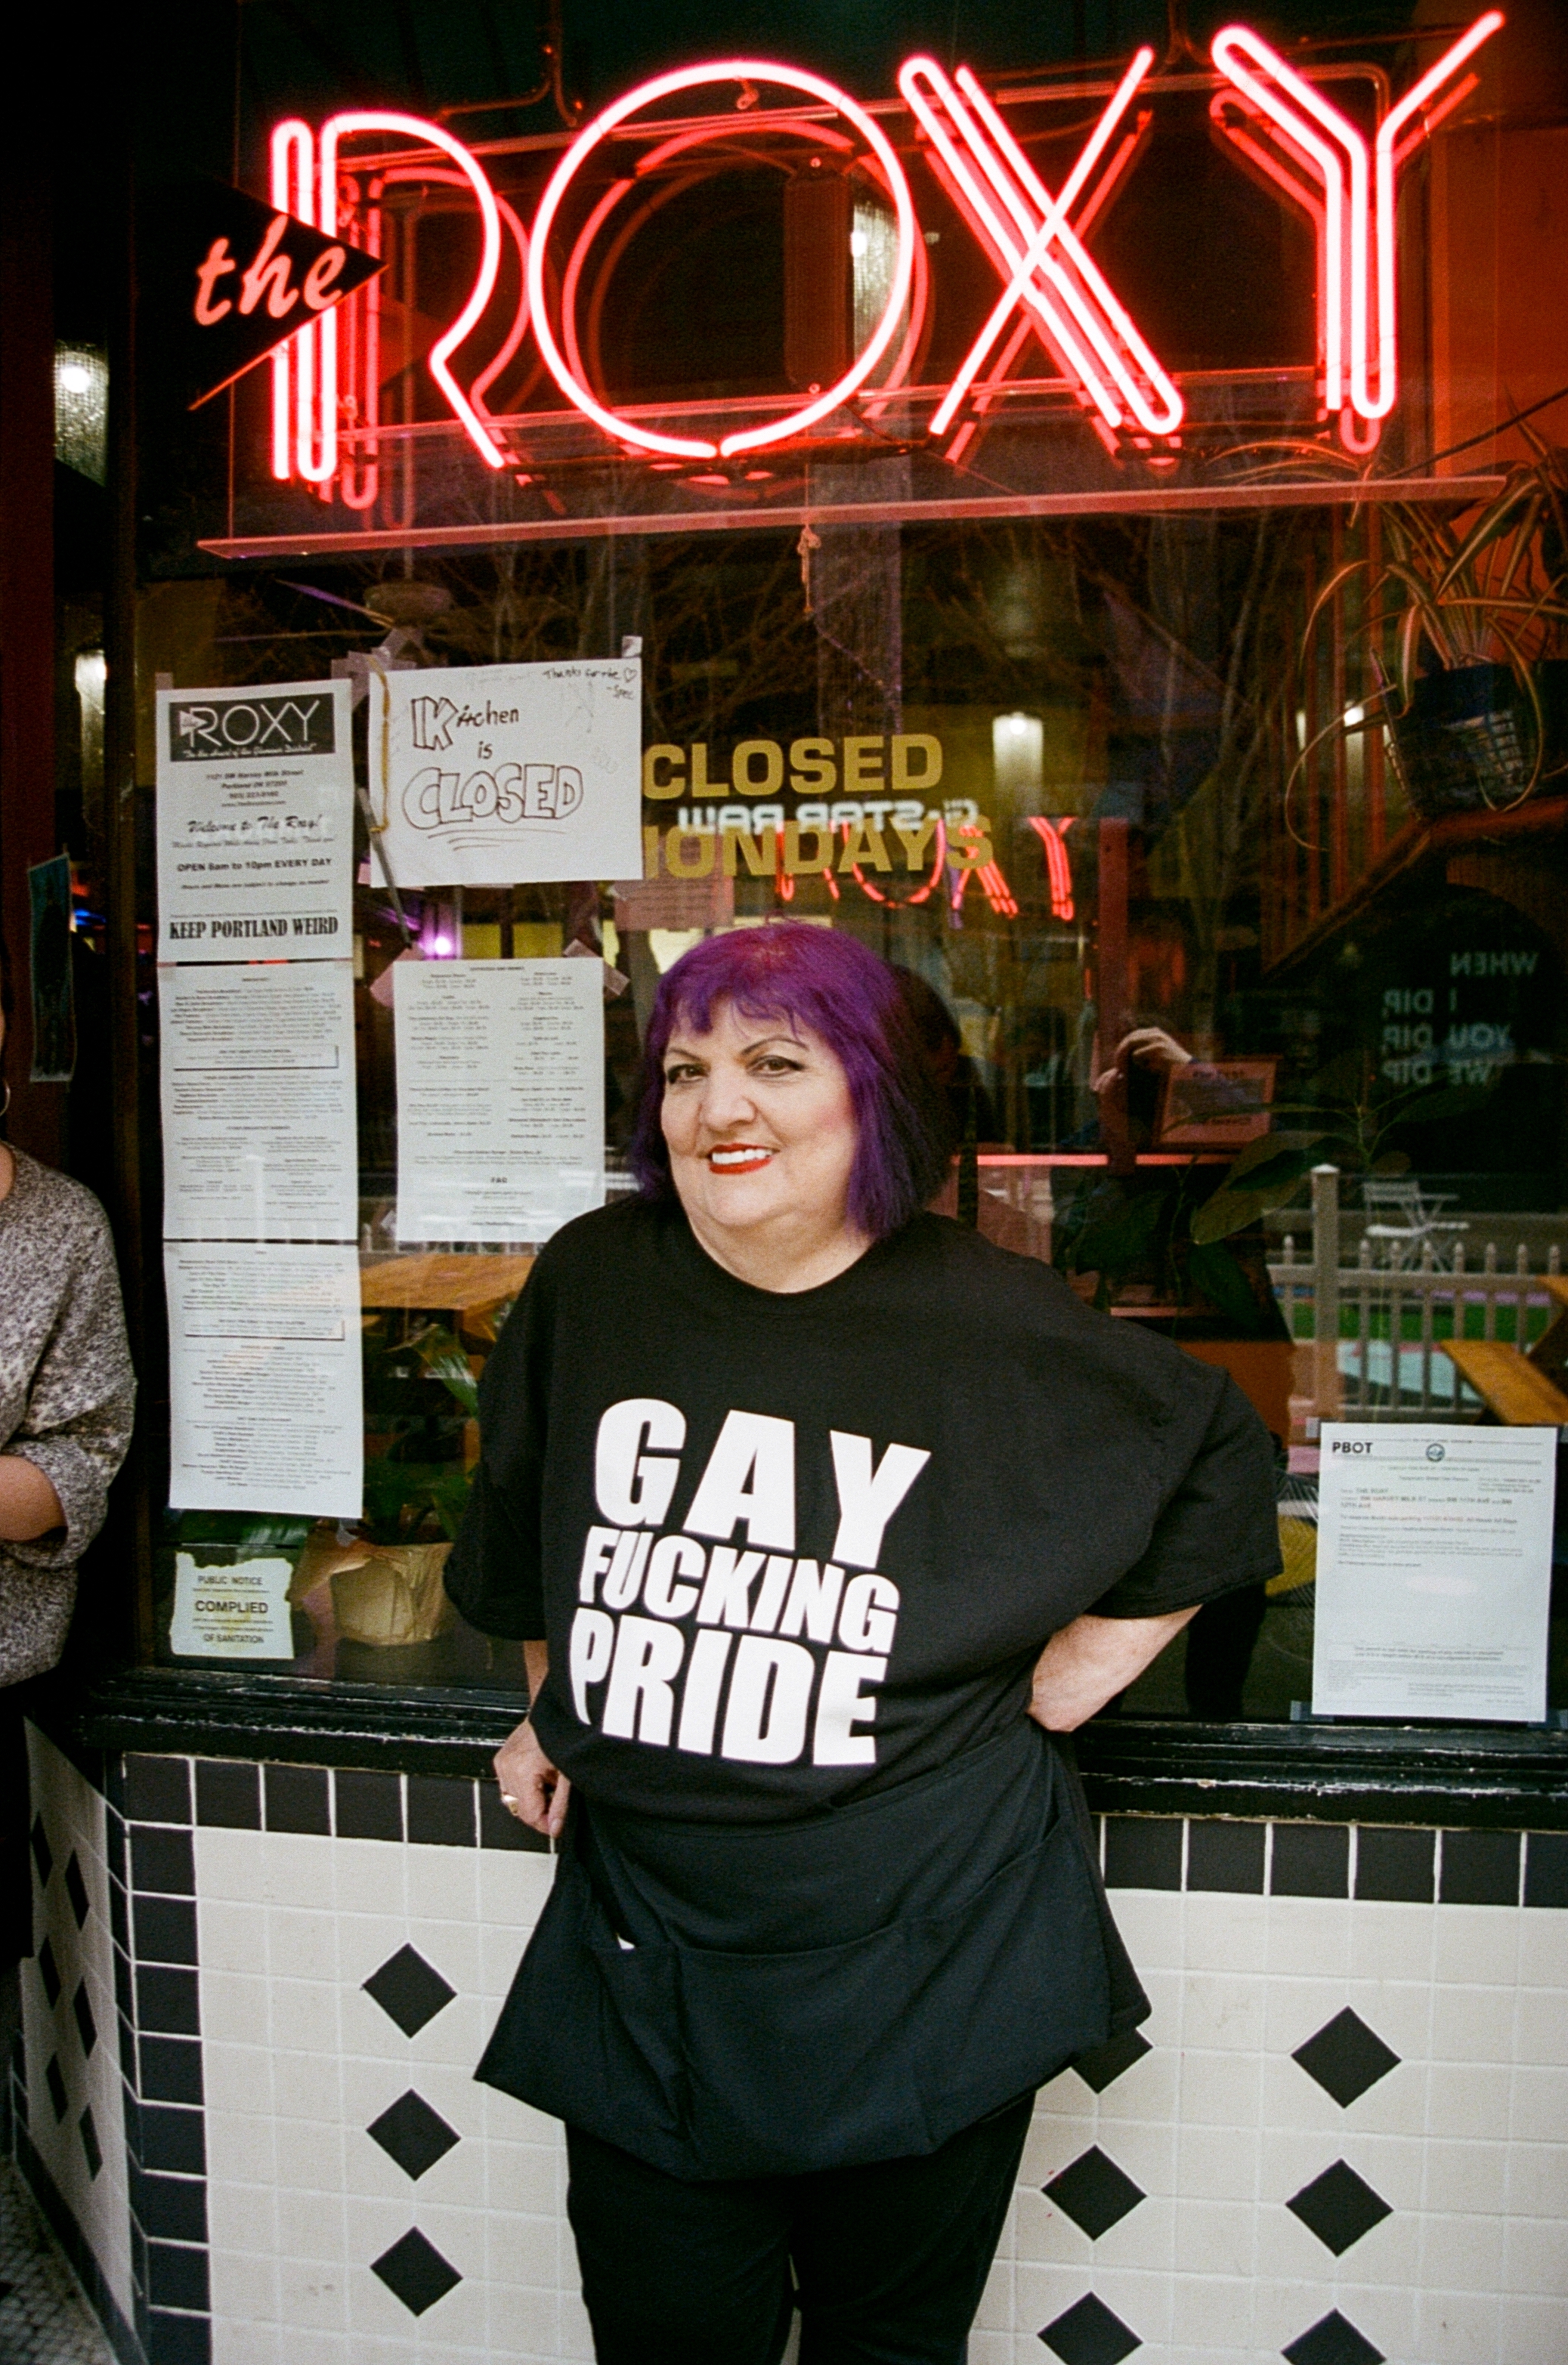 Suzanne Hale wears a black t-shirt that reads “Gay Fucking Pride,” standing outside the Roxy.